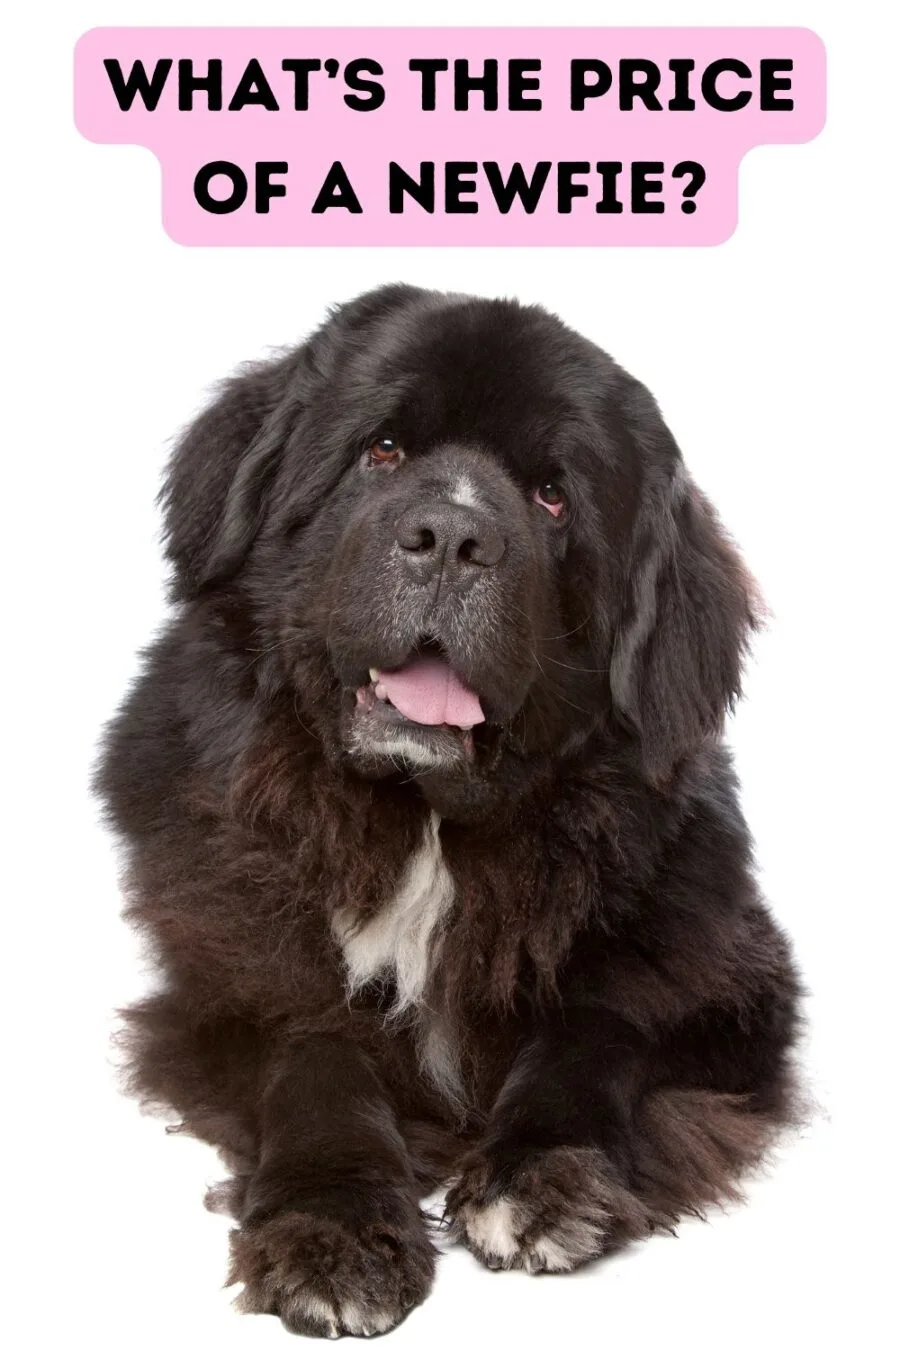 Newfoundland dog against white background; words "what's the price of a Newfie?" at top of image